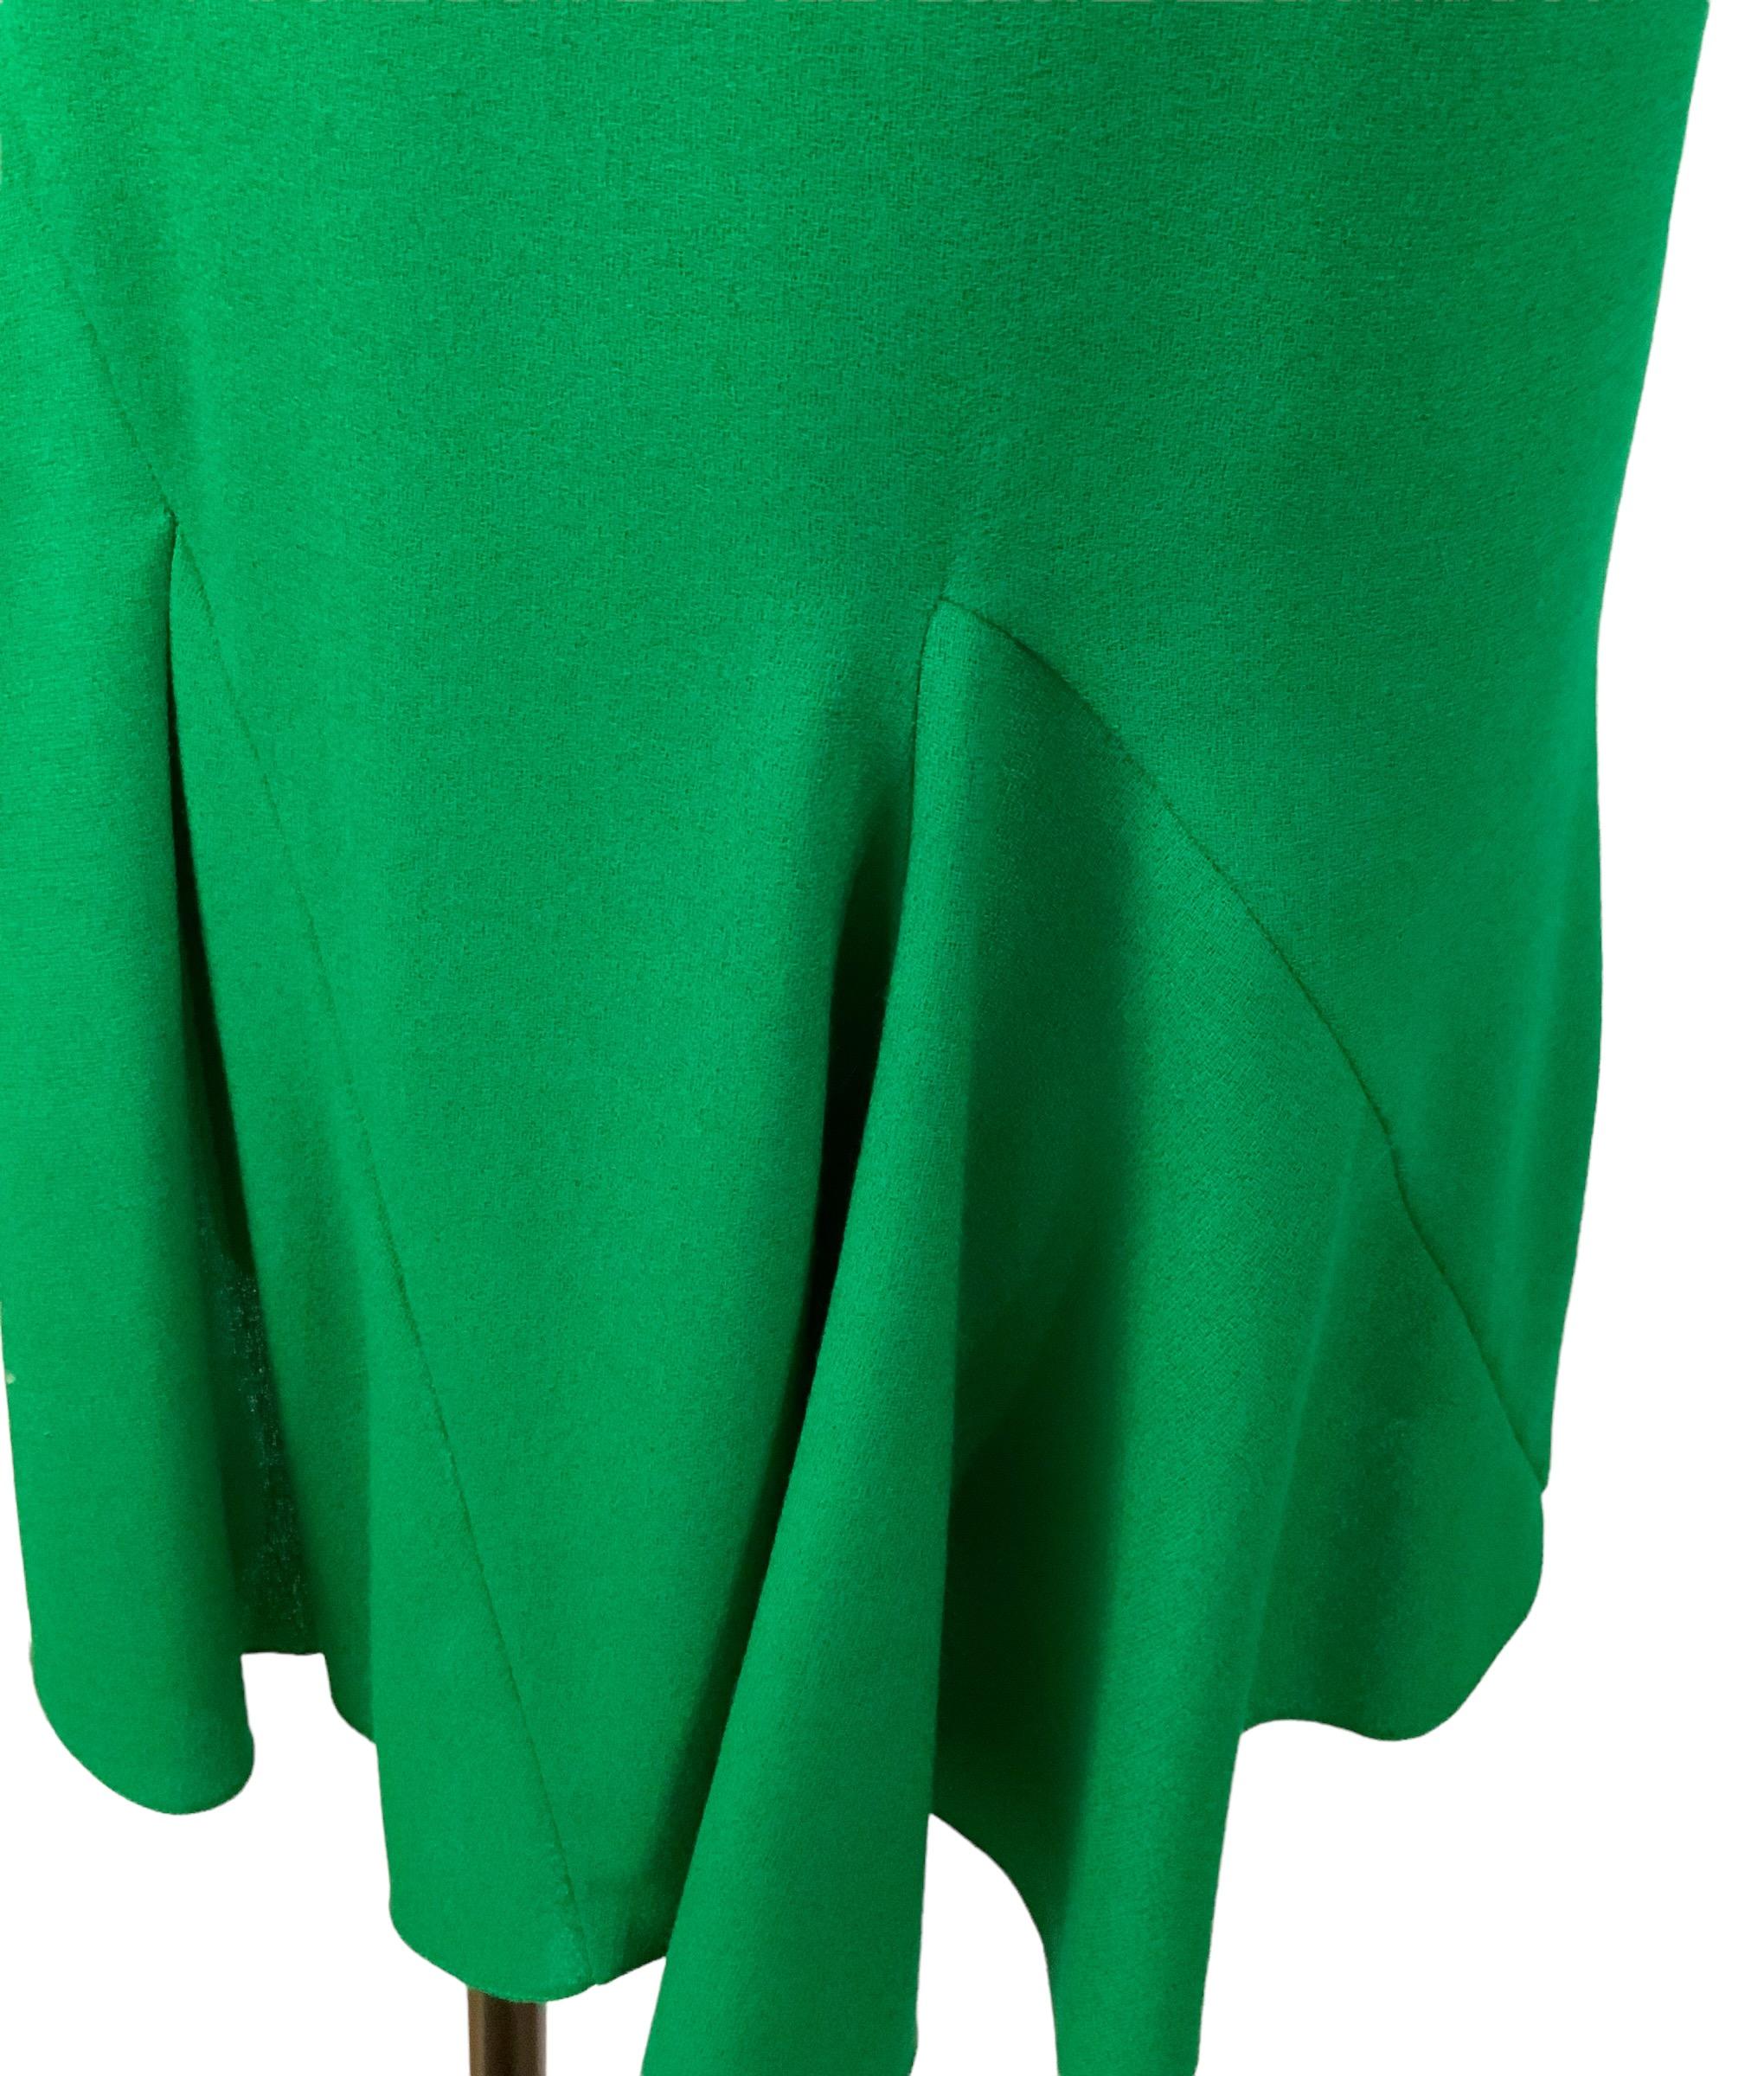 Christian Dior Fitted and Flared Green Dress   In Excellent Condition For Sale In Geneva, CH